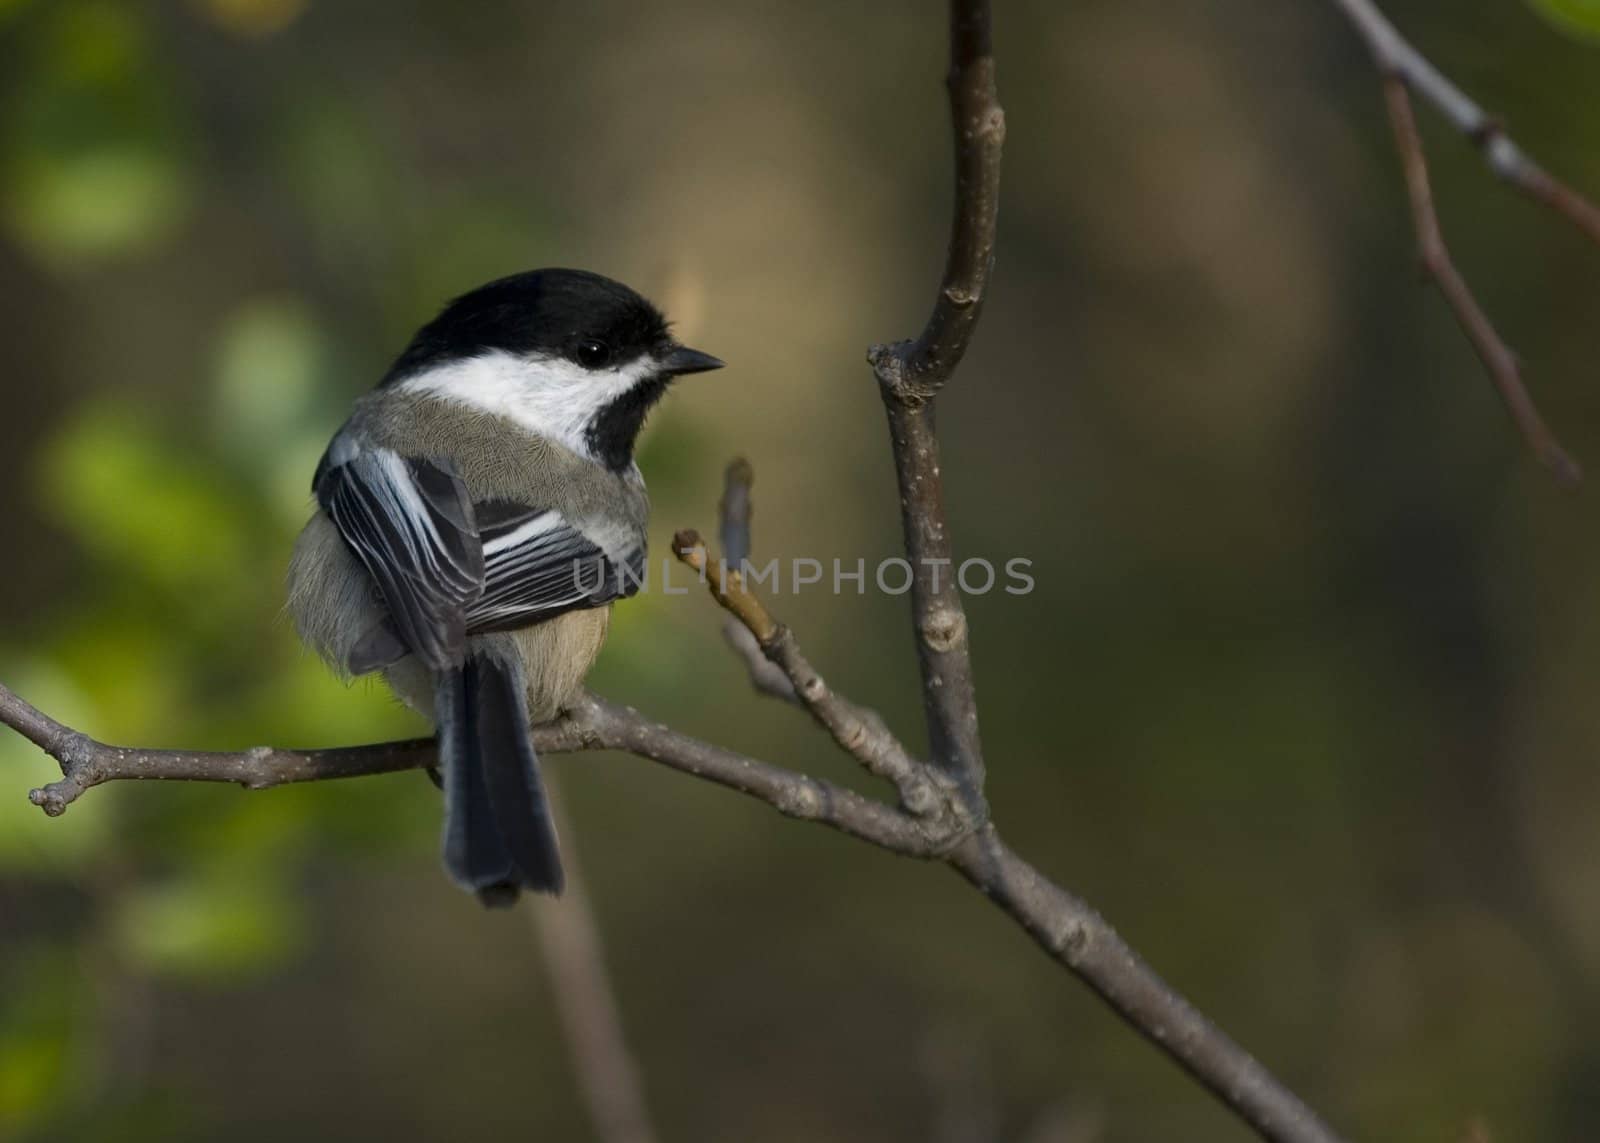 Black-capped chickadee perched on a branch.